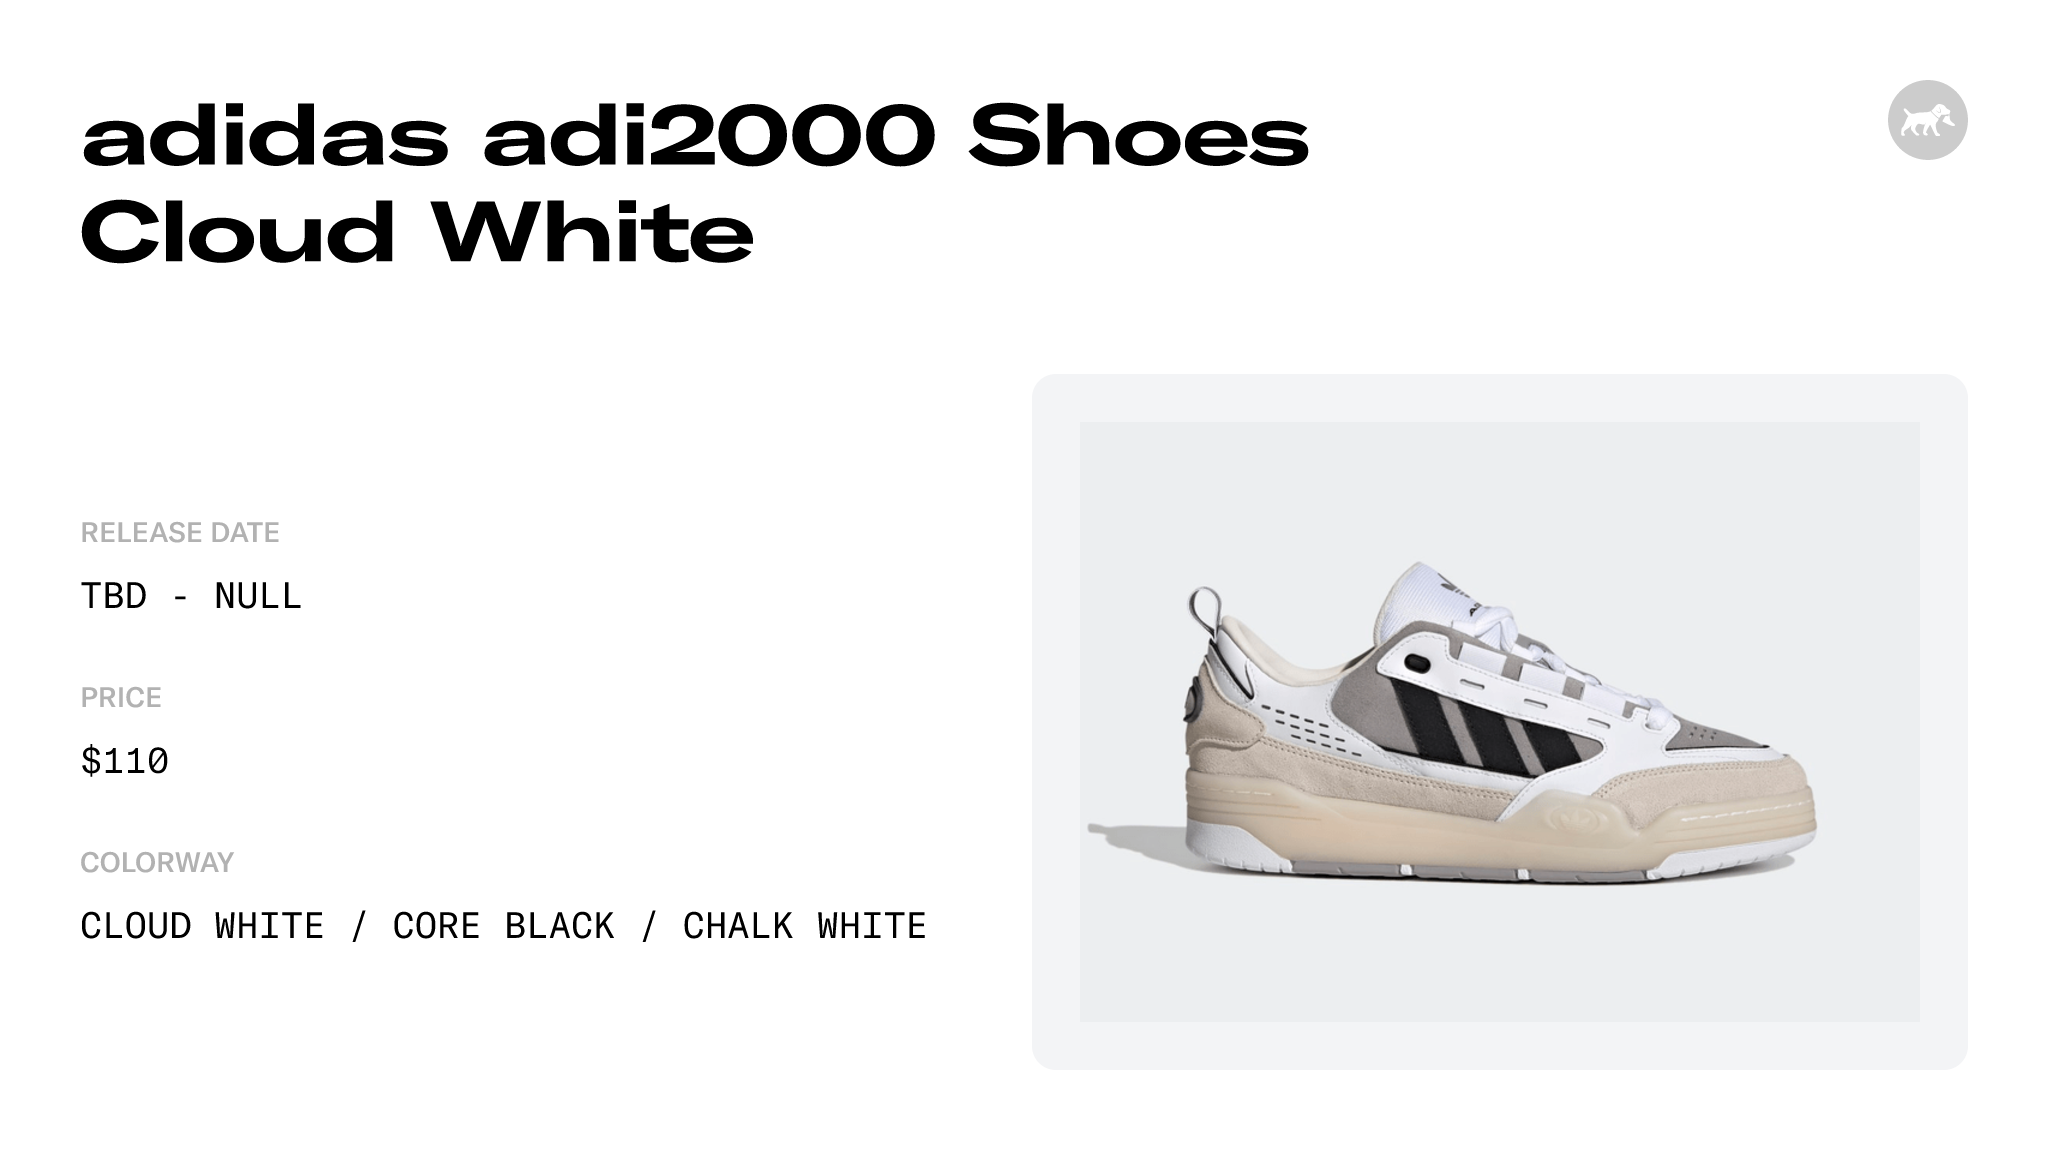 adidas adi2000 Shoes Cloud White Release GV9544 Raffles - Date and